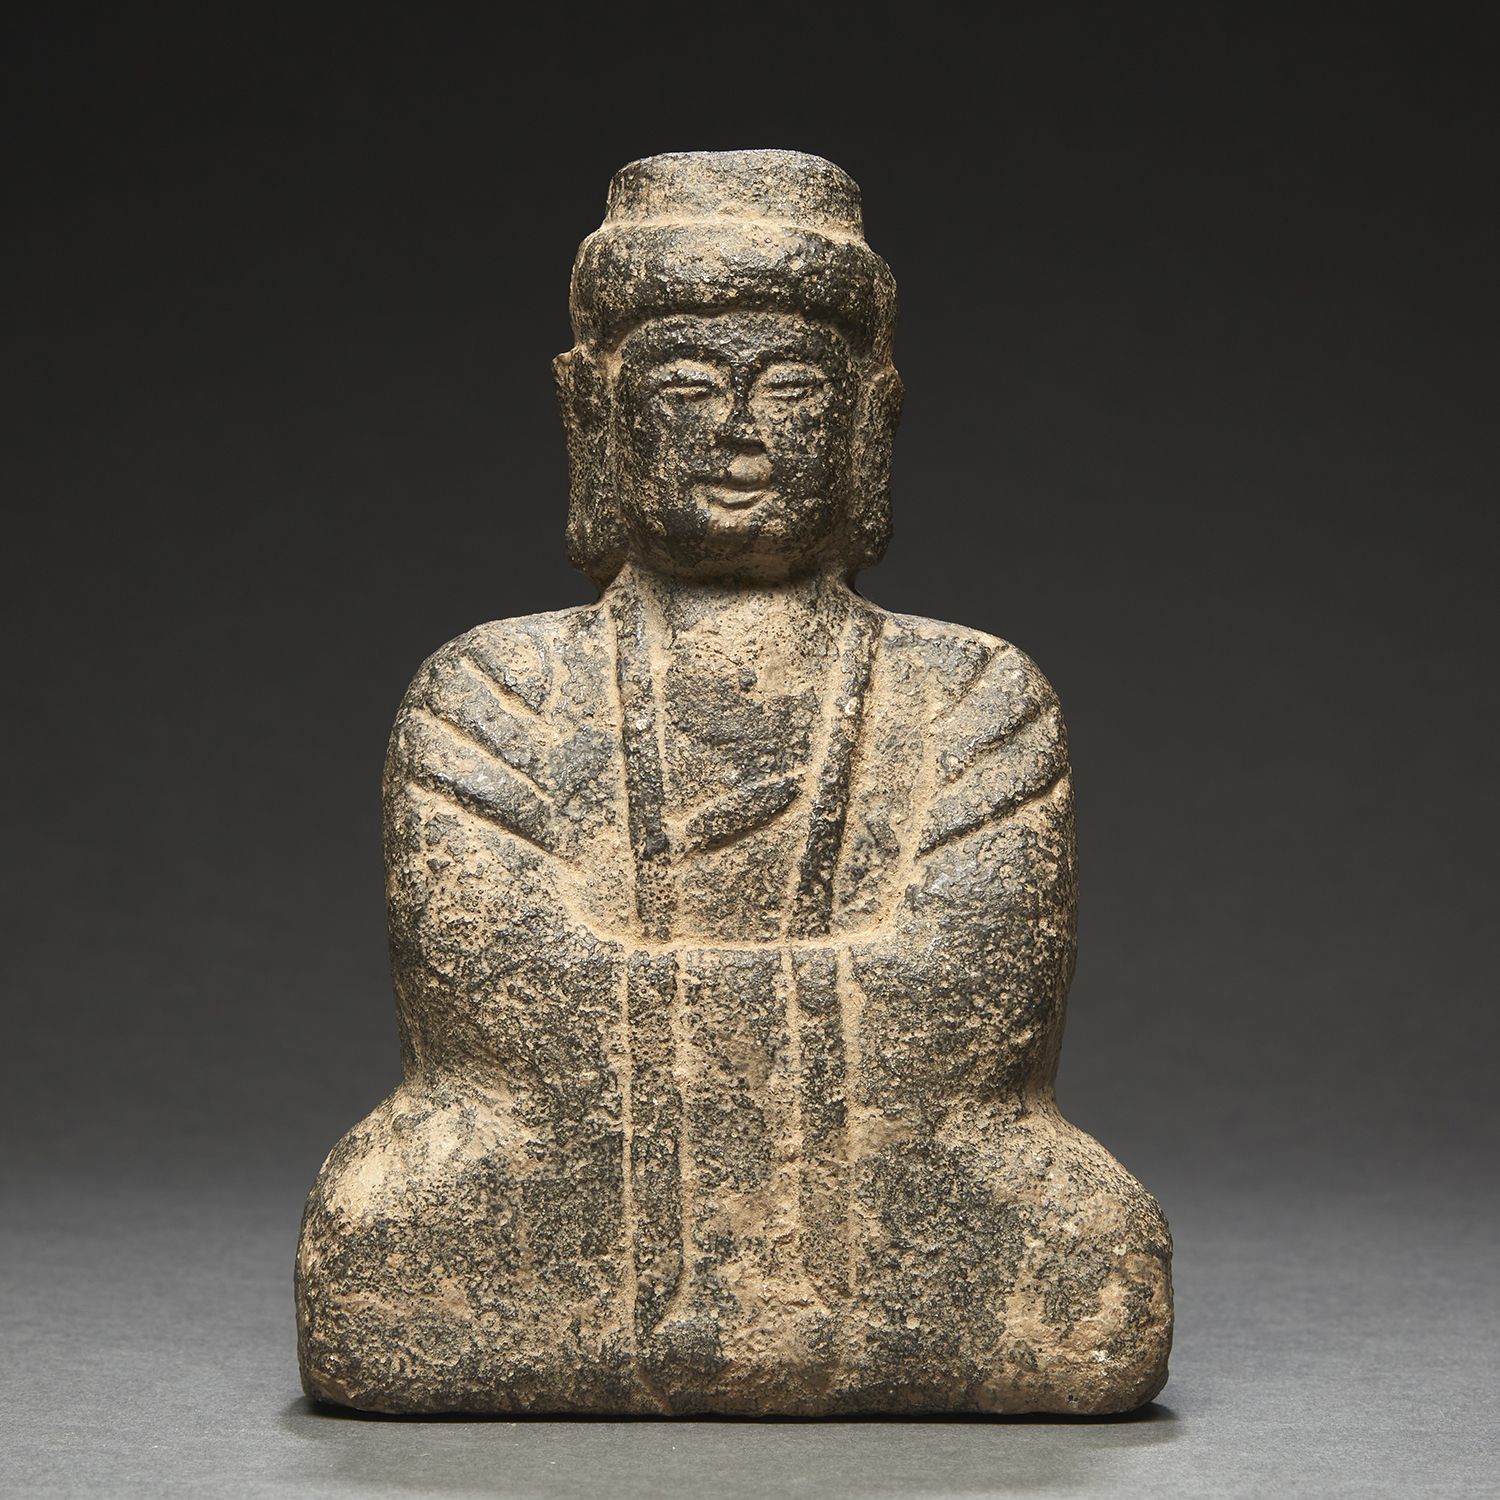 Null STATUE
in stone, brown-black color, representing Buddha seated in meditatio&hellip;